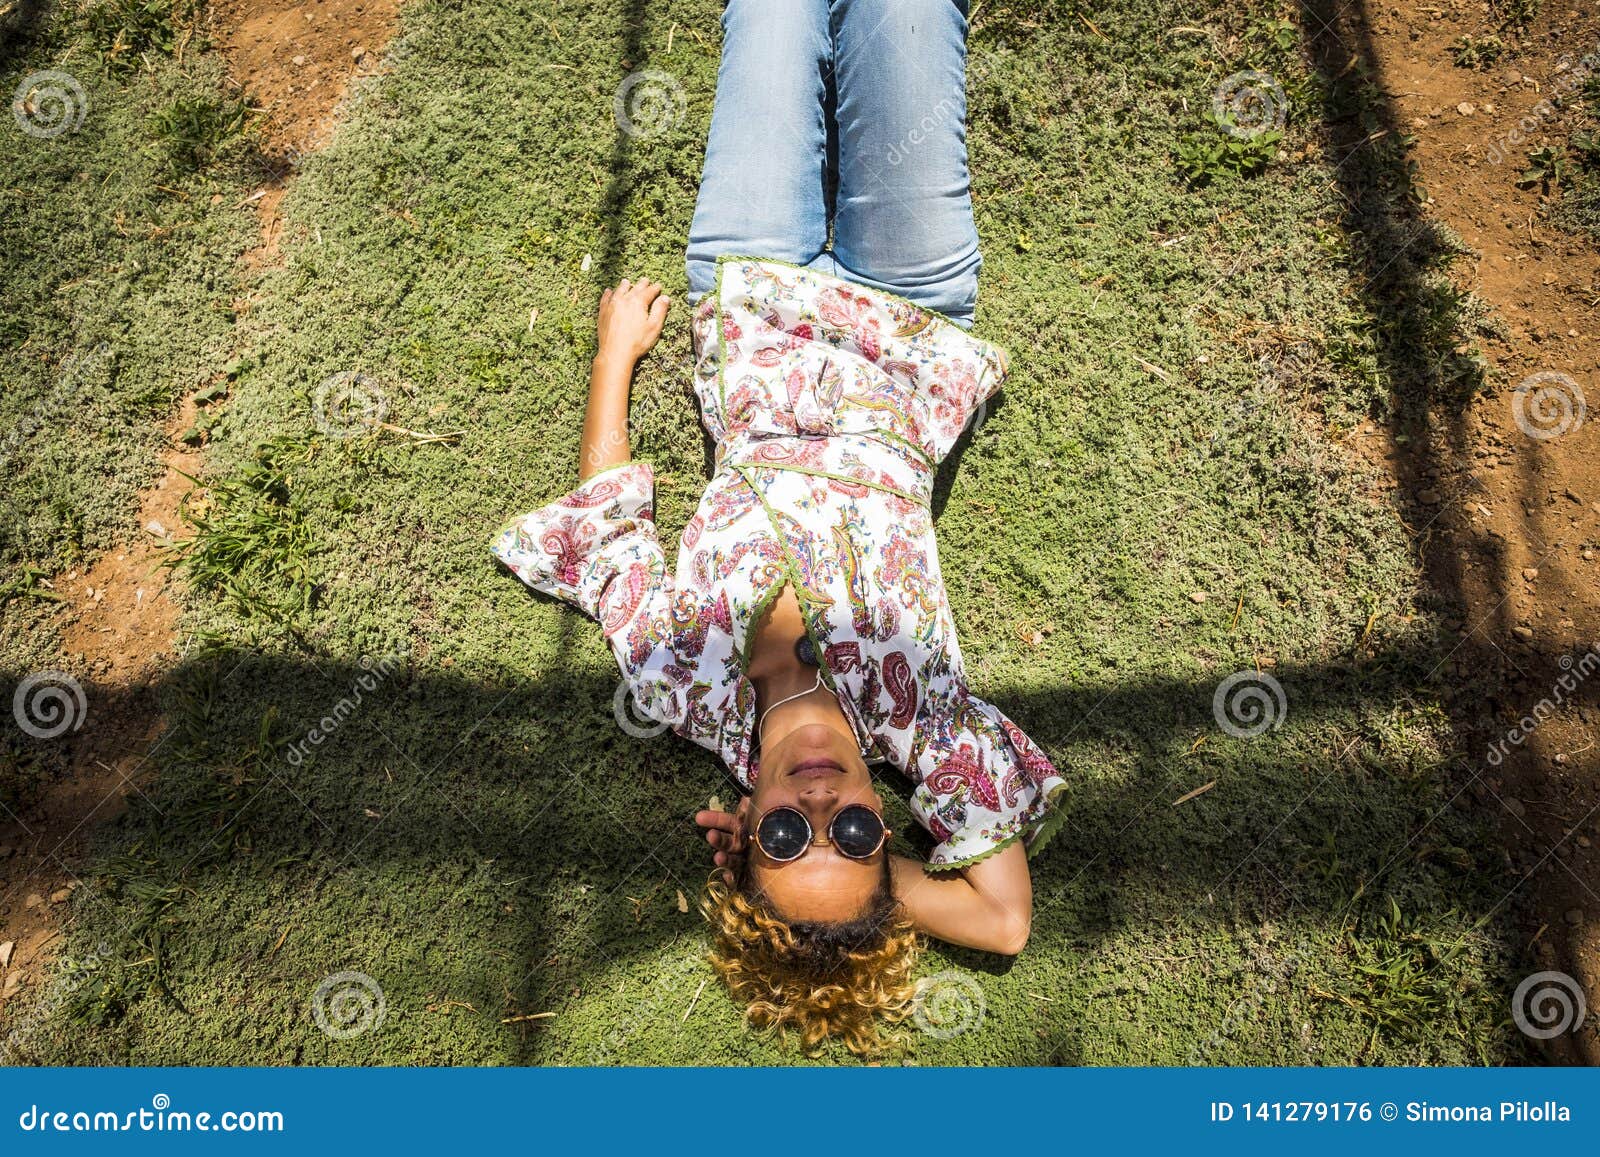 aerial point of view for pretty woman smile and rest laying down on a timo grass. hippy and fashion clothes with jeans. sunglasses